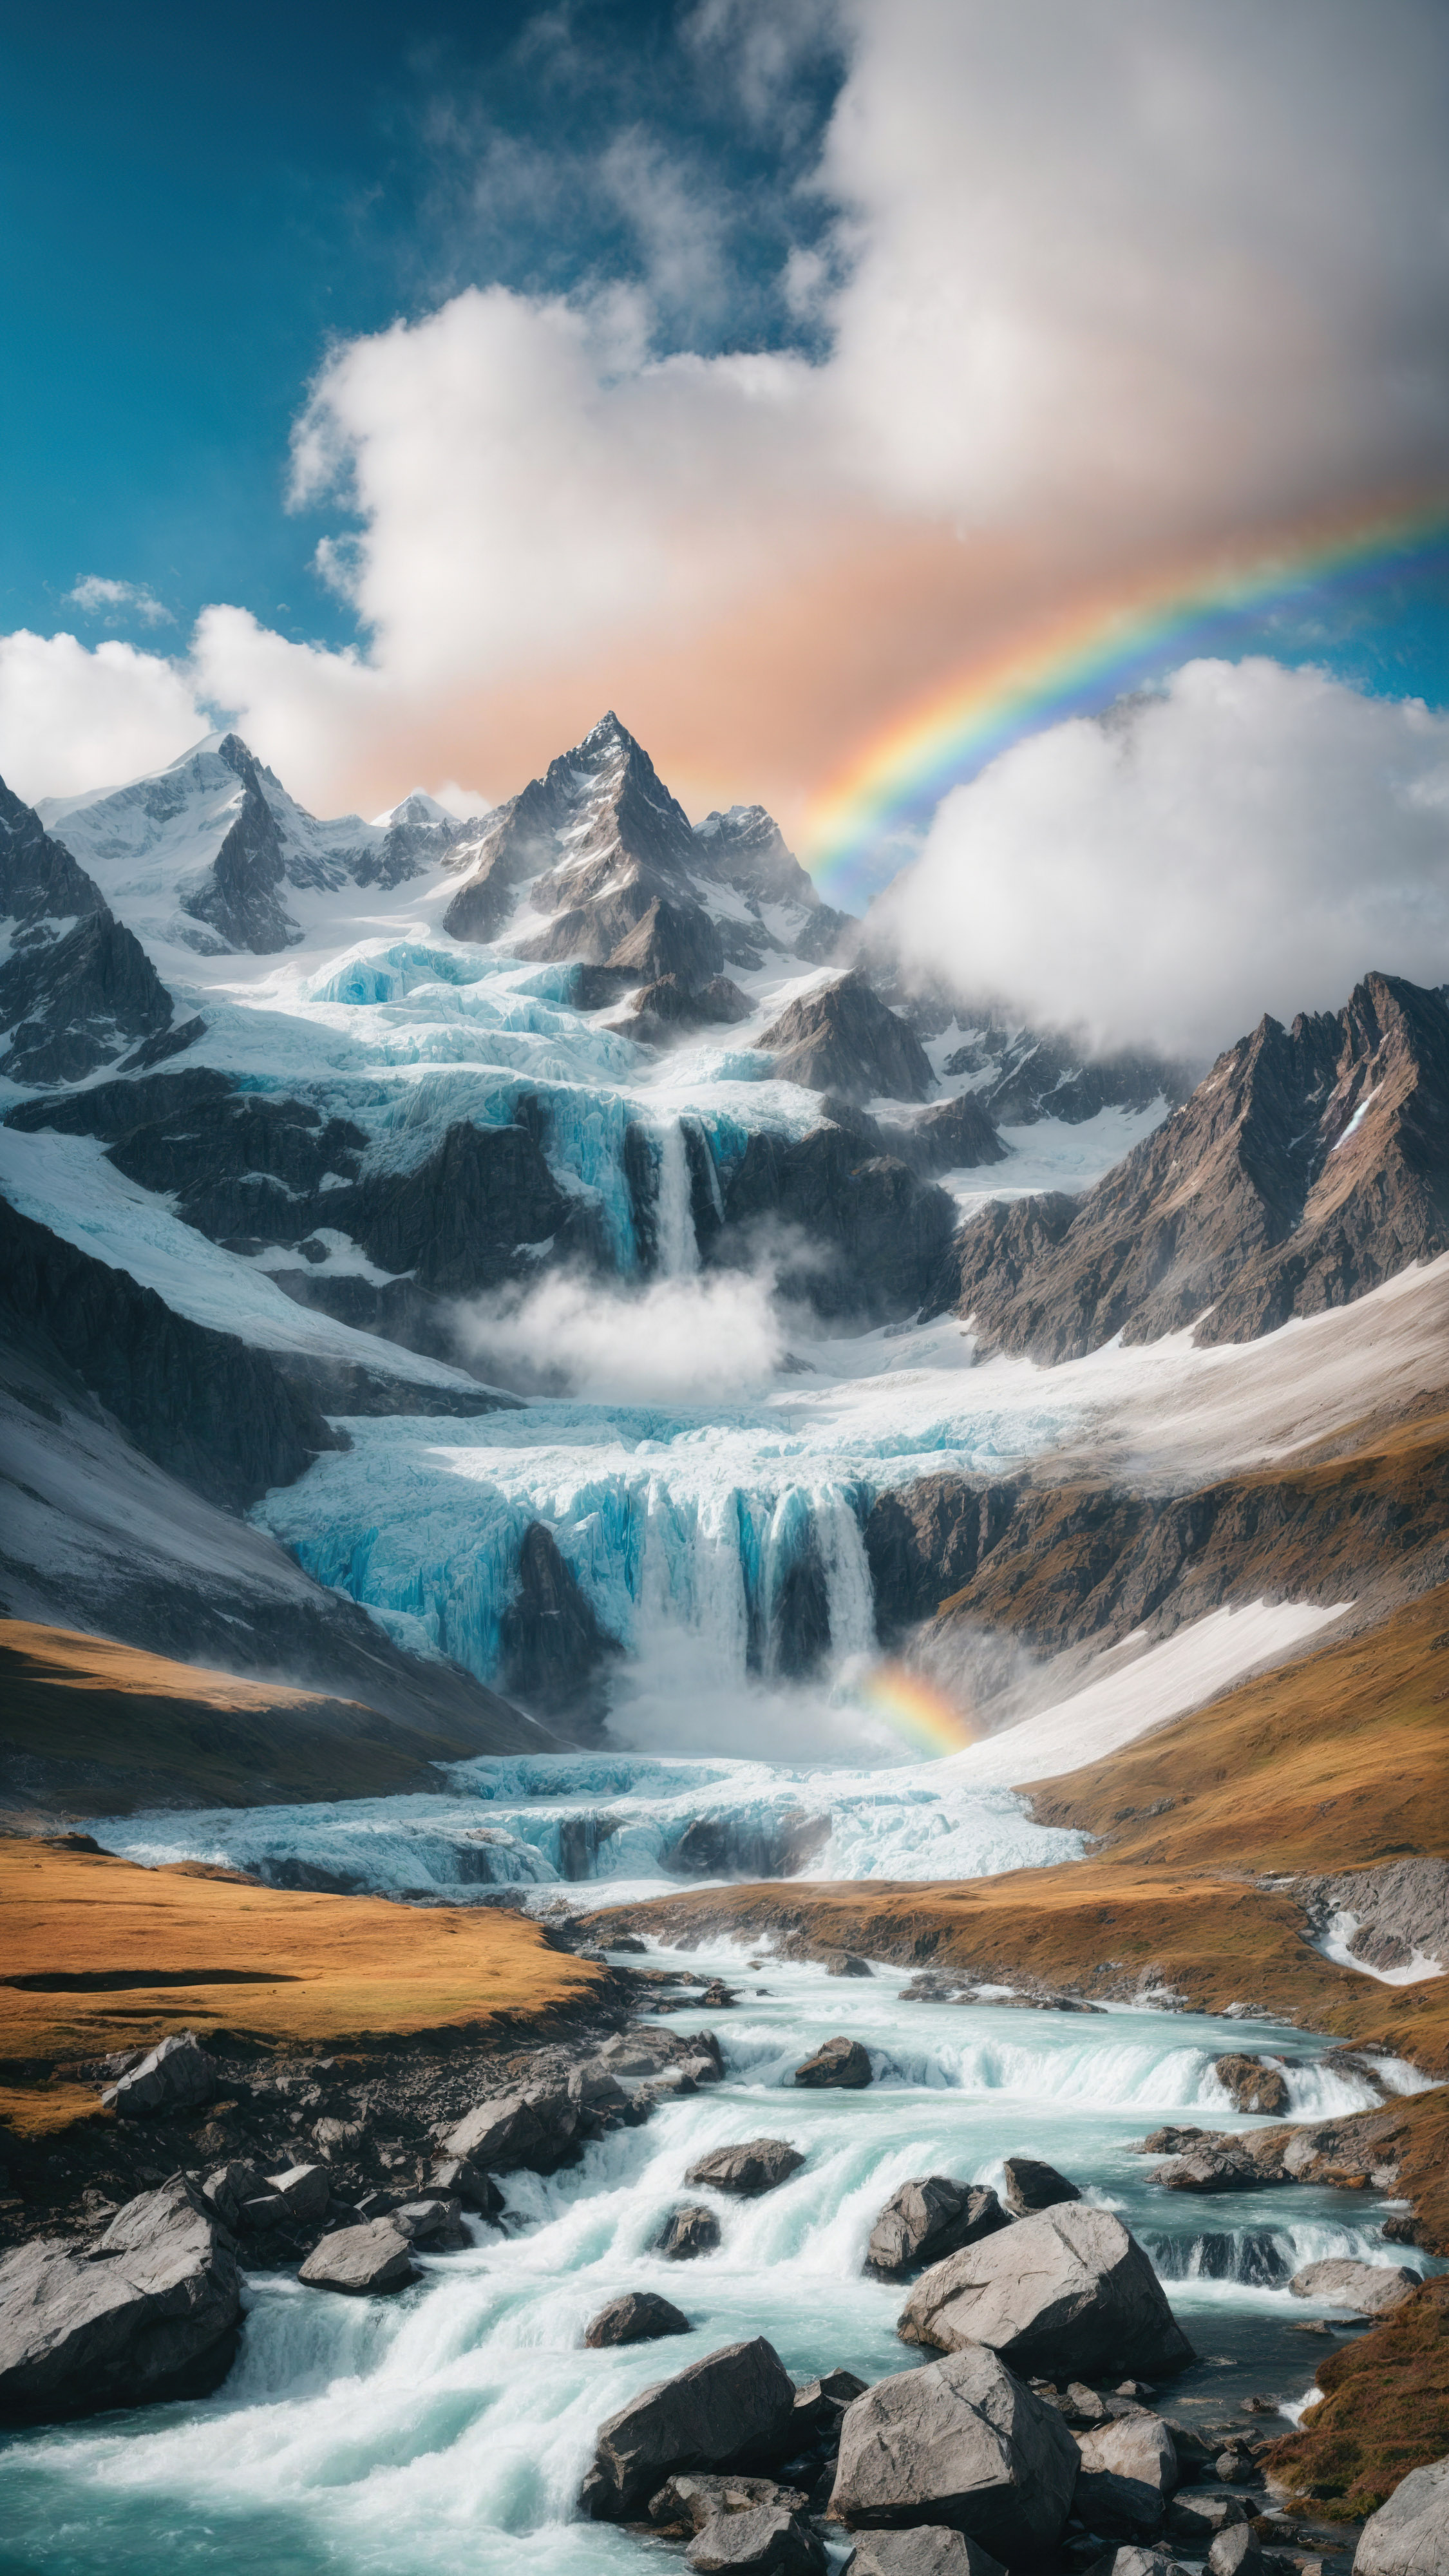 Feel the chill of a snowy mountain range with a glacier and a waterfall, under a rainbow and a blue sky, with our mountain screensaver for iPhone.